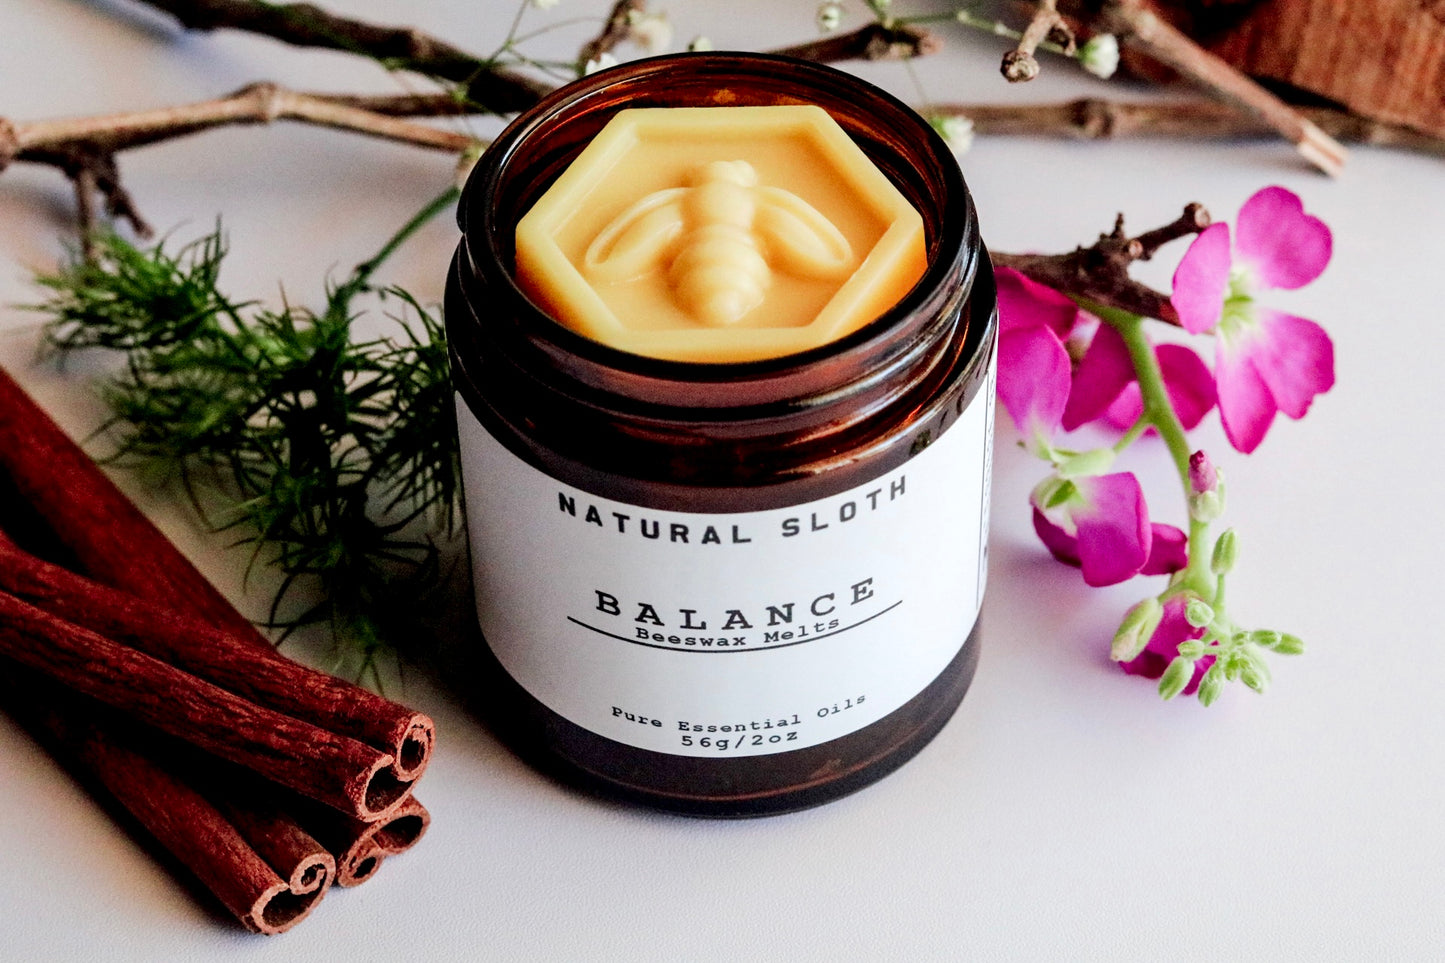 Balance Wax Melts with Essential Oils